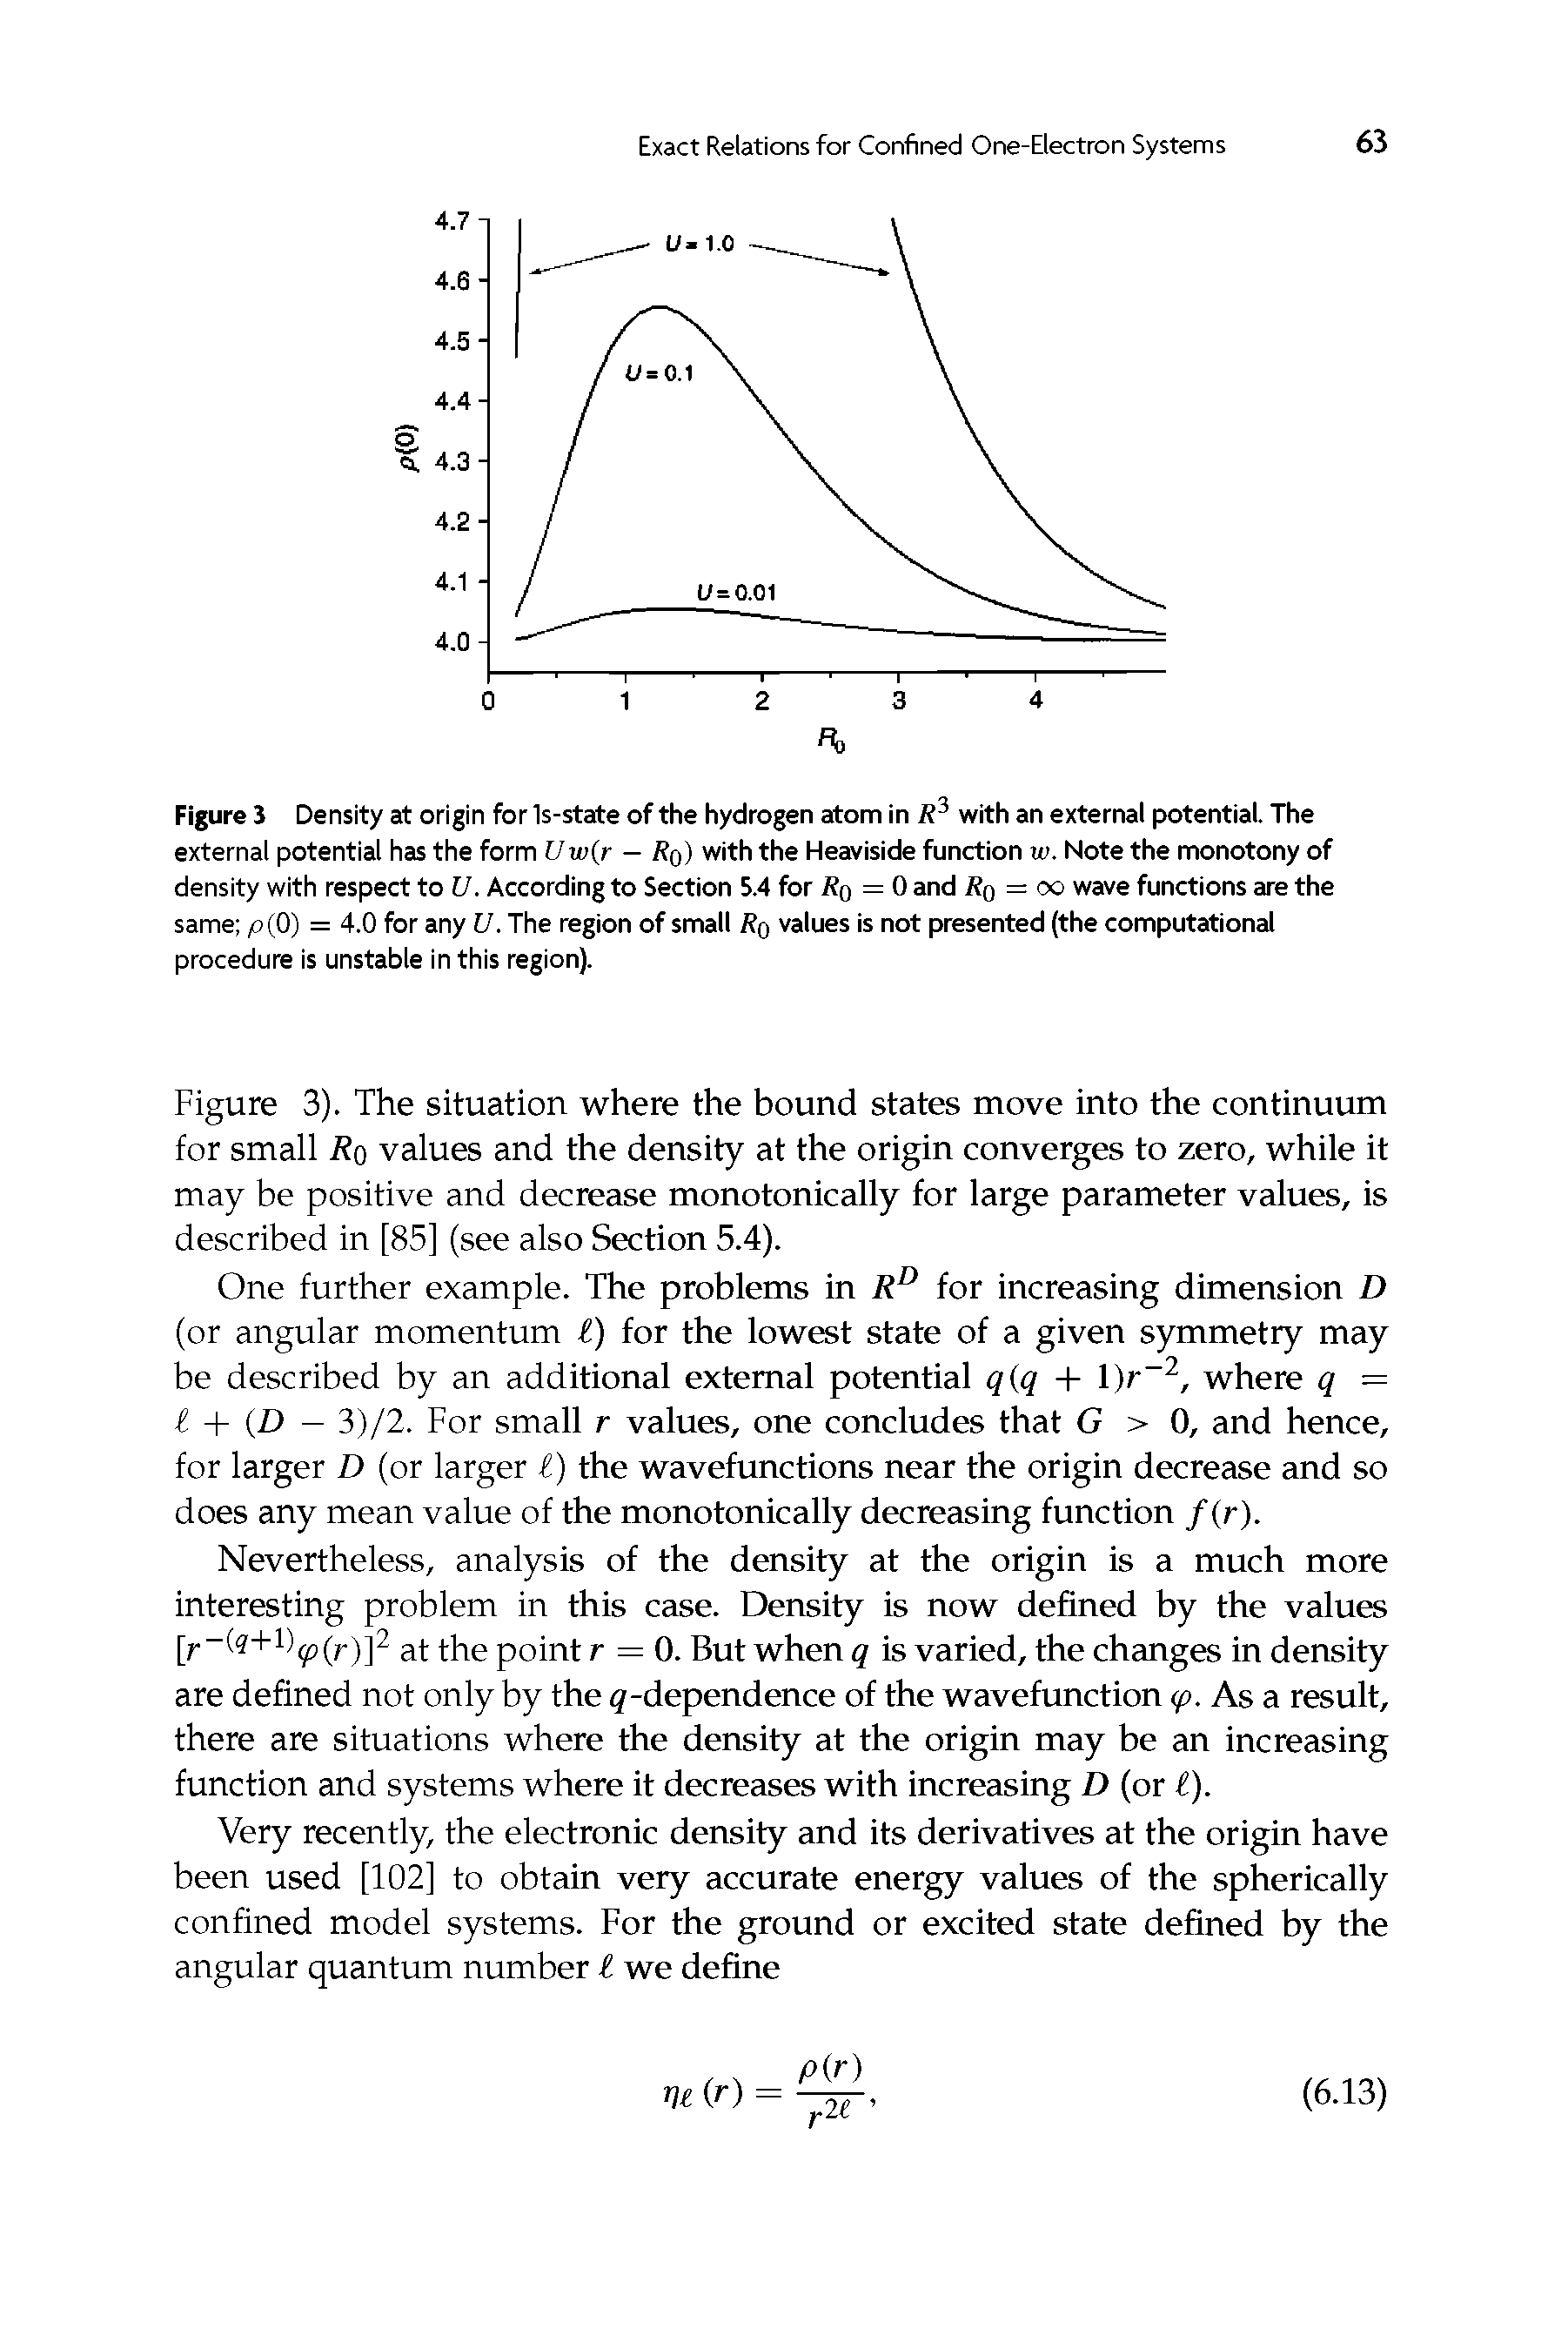 Figure J Density at origin for Is-state of the hydrogen atom in R3 with an external potential. The external potential has the form U w r — Rq) with the Heaviside function w. Note the monotony of density with respect to U. According to Section 5.4 for Ro =0 and Rq = oo wave functions are the same p(0) = 4.0 for any U. The region of small Rq values is not presented (the computational procedure is unstable in this region).